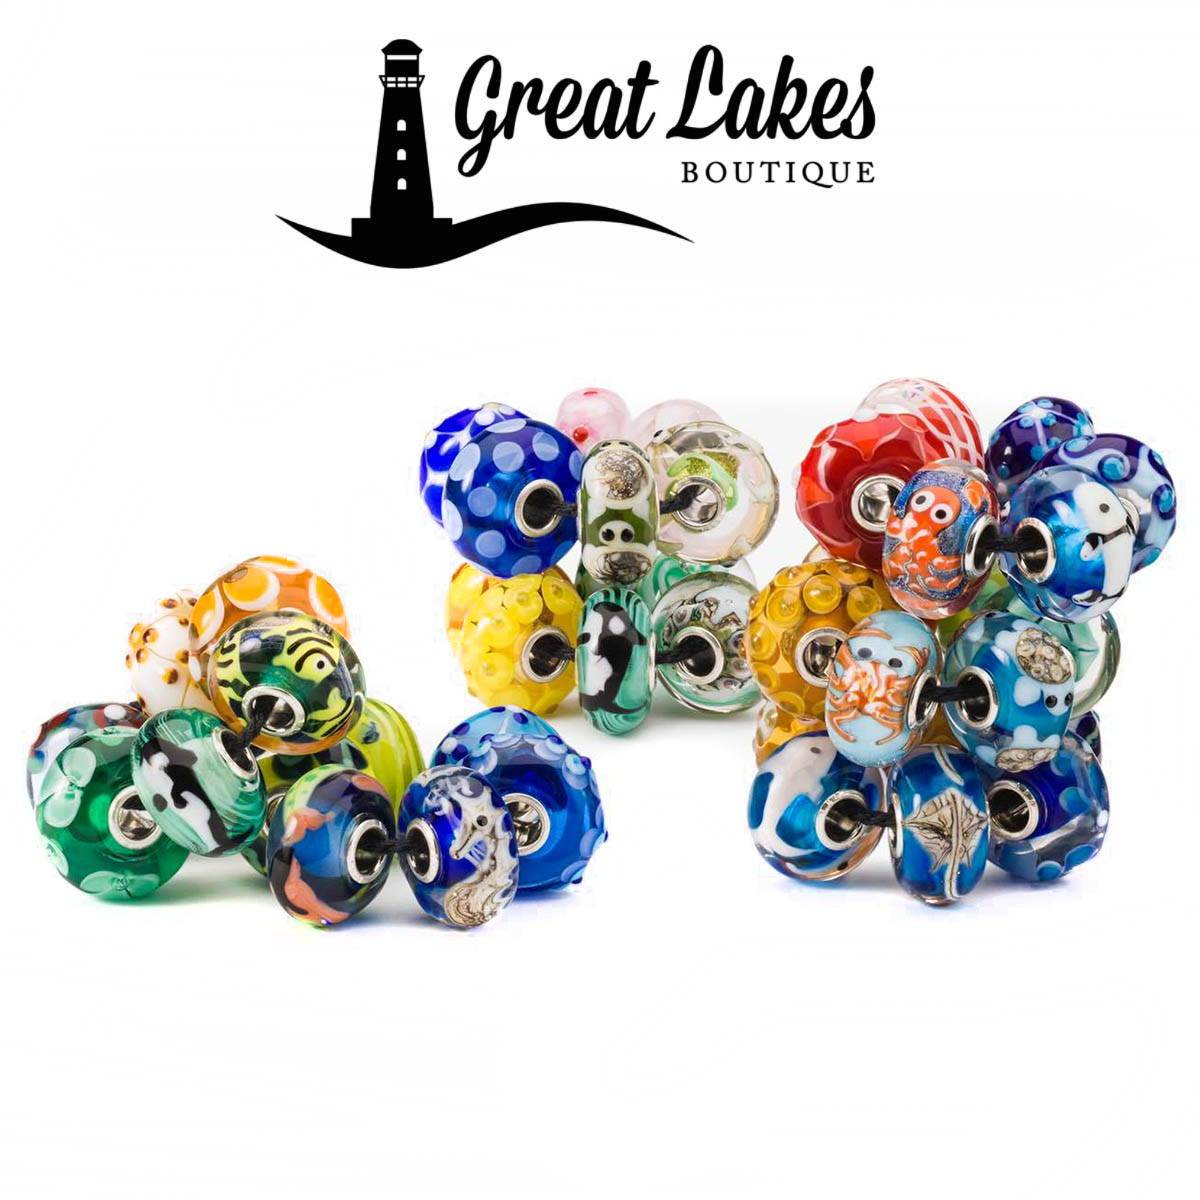 Trollbeads Summer 2020 Unique Kits Debut